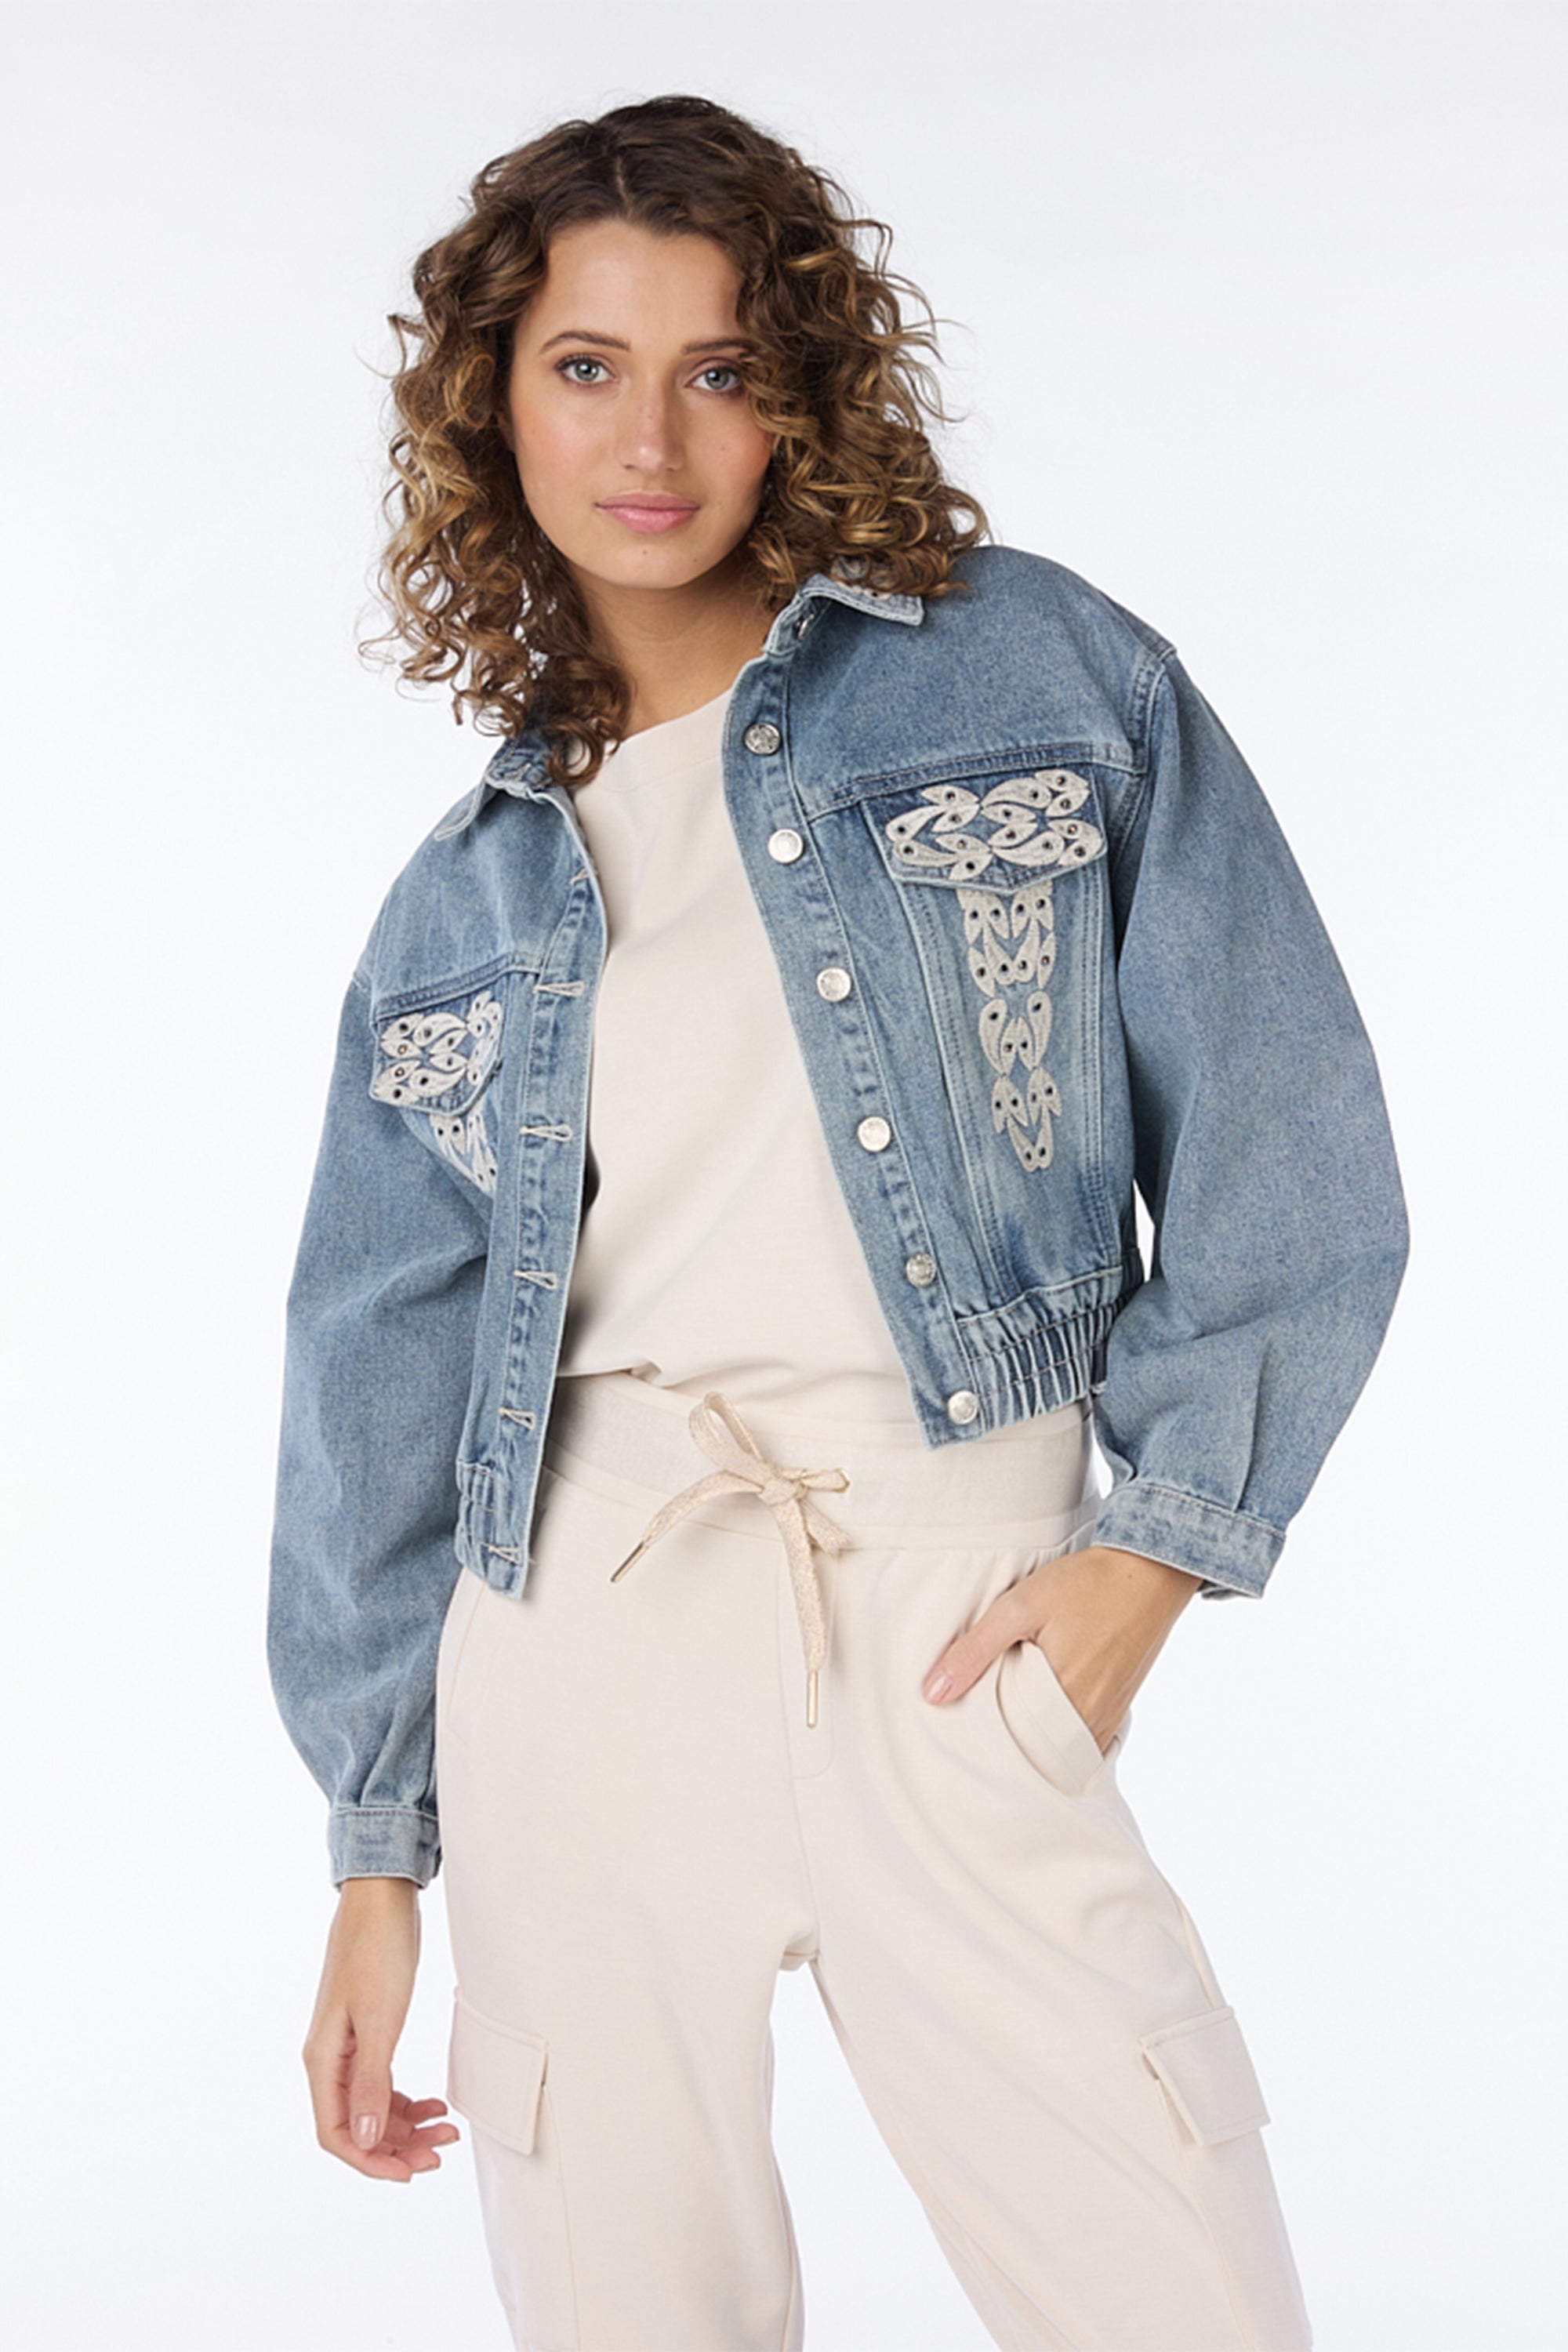 Esqualo (SP2412002) Women's Long Sleeve Cropped Blue Jean Jacket With Embroidery & Rhinestones on Collar and Front Panels